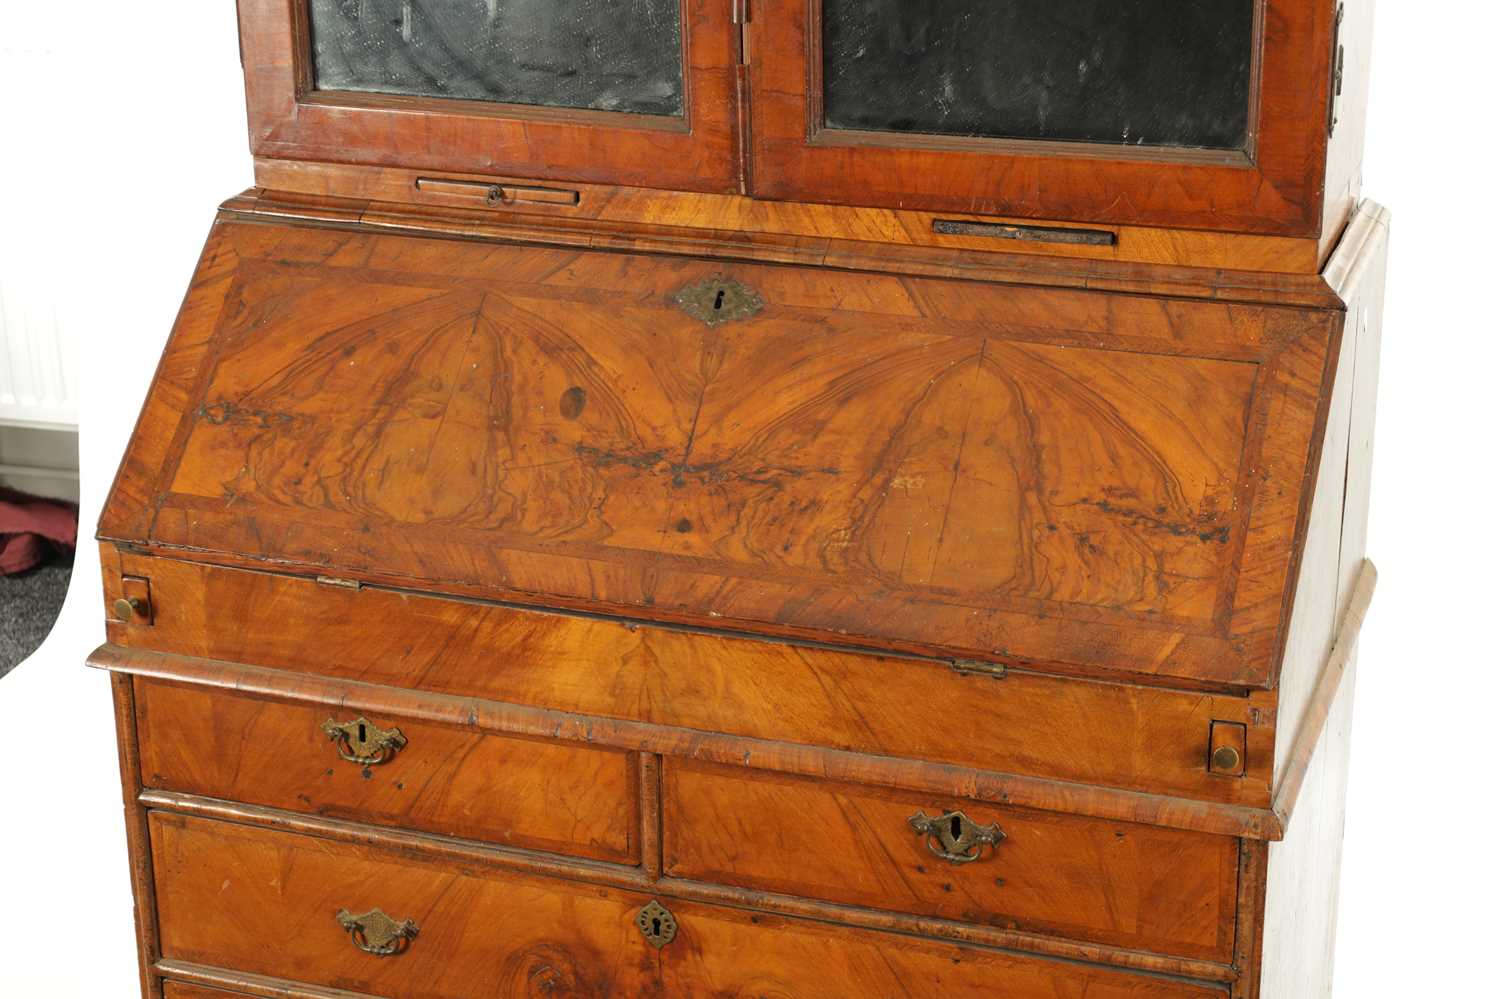 AN EARLY 18TH CENTURY FIGURED WALNUT AND OAK BREAK ARCHED TOP BUREAU BOOKCASE - Image 2 of 10